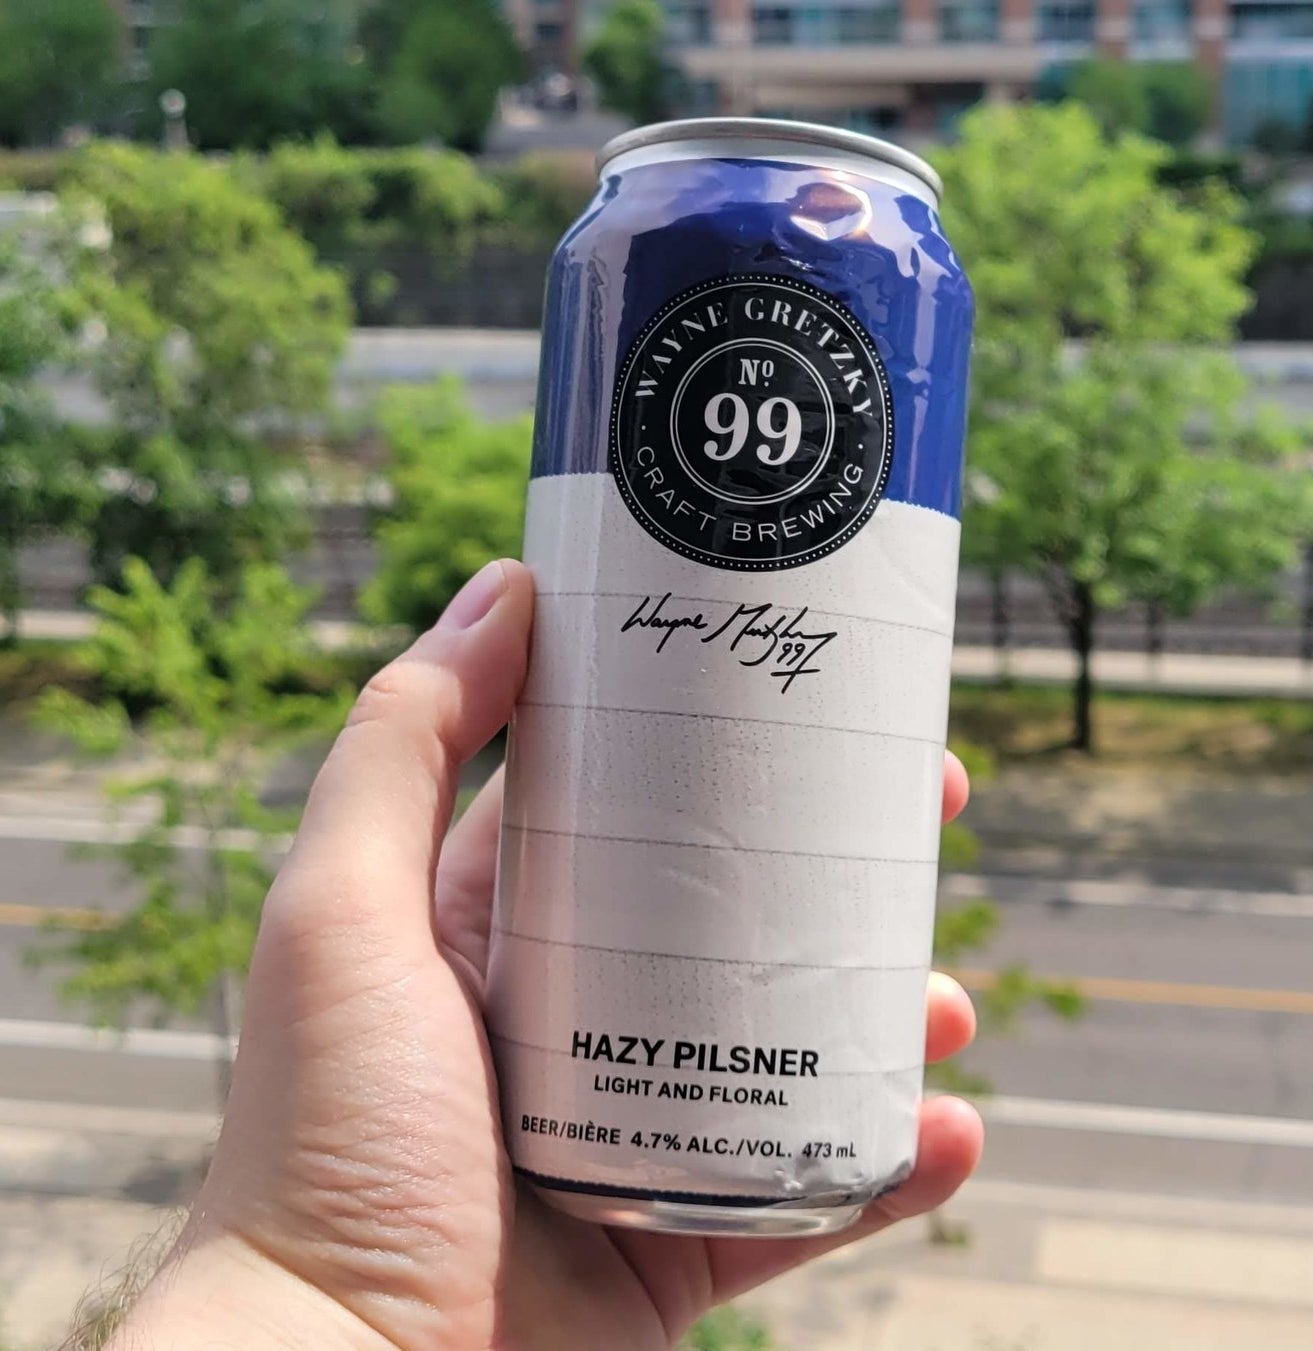 A can of Hazy Pilsner by Wayne Gretzky being held in a hand.